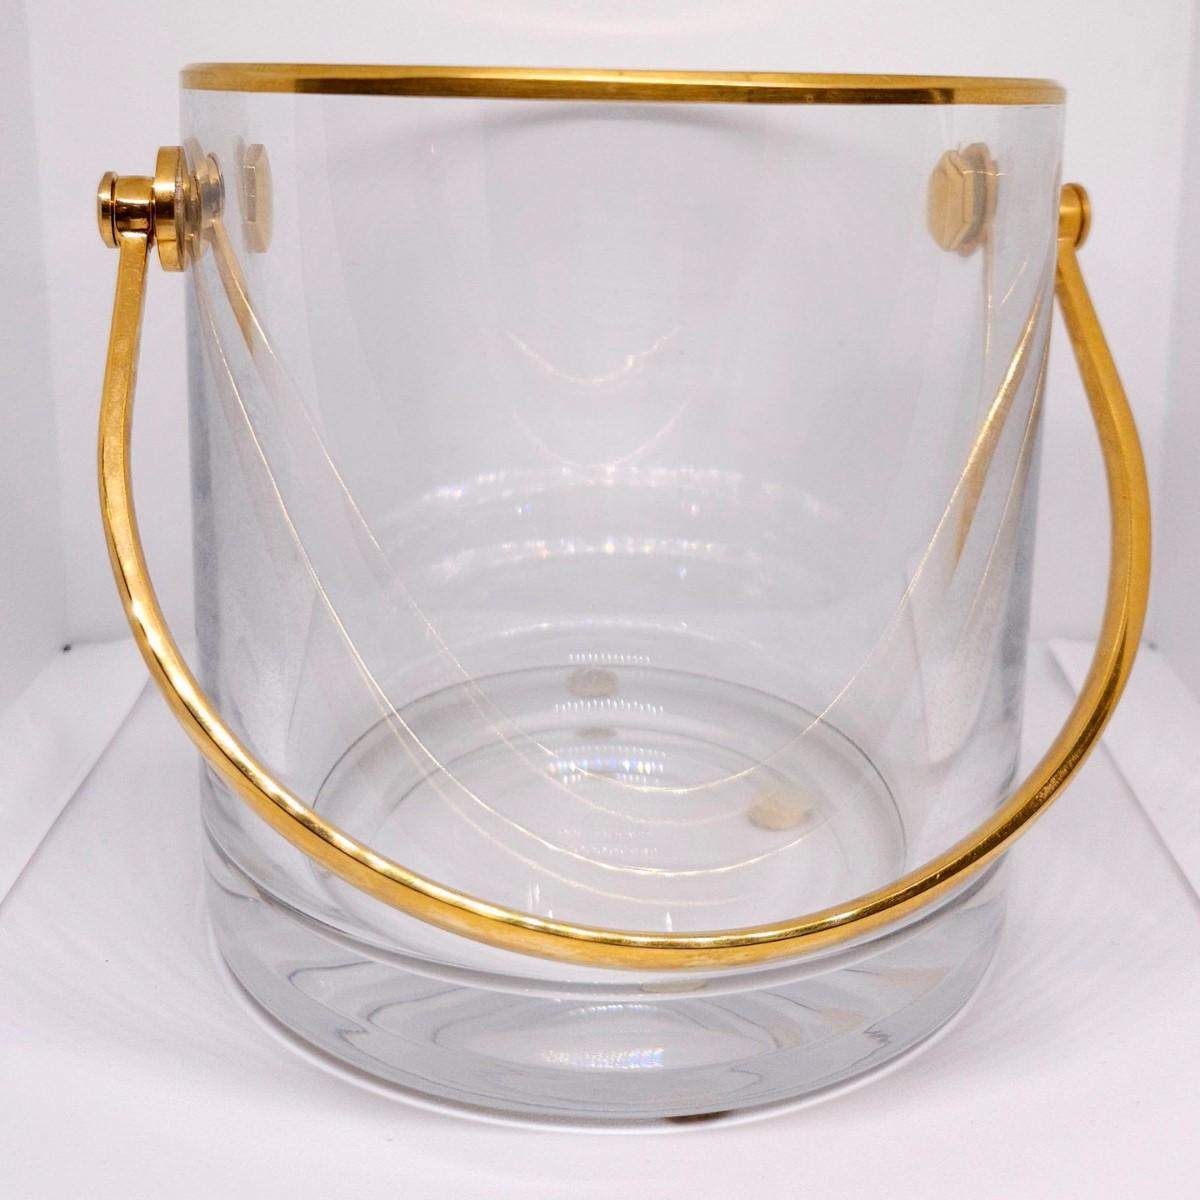 Vintage Baccarat France Crystal Ice Bucket with Gold Handle. It has 